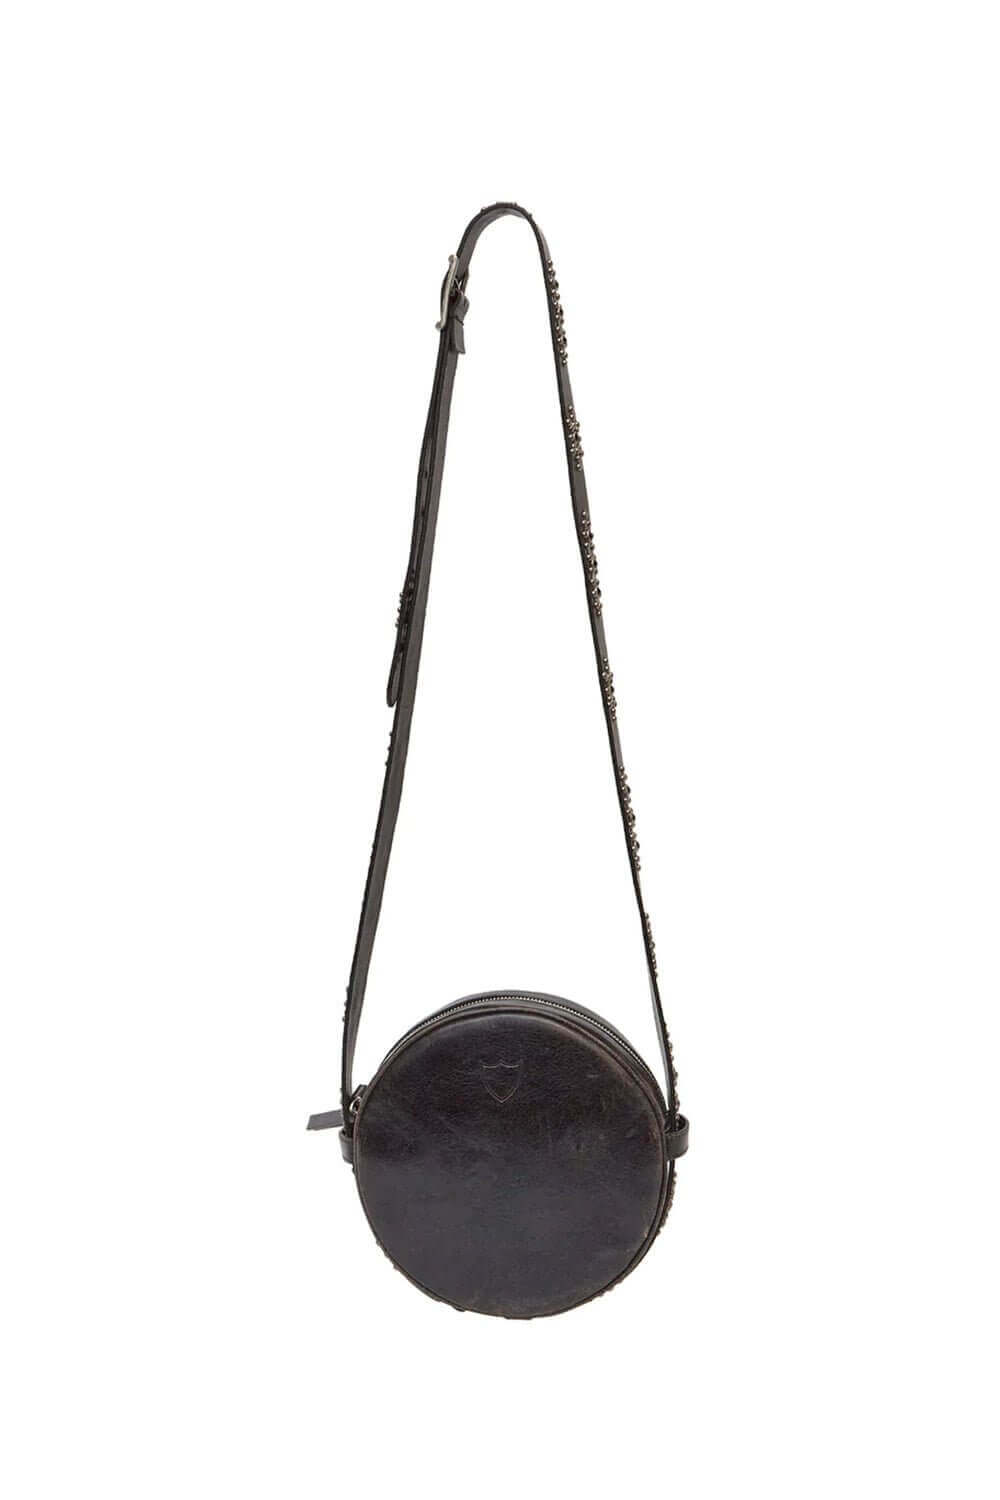 BEBE ROUND BAG Round leather bag with zip closure. Inner lining with two pockets. Studded shoulder strap. Lenght: 18 cm. Height: 18 cm. Depth: 5 cm. Made In Italy. HTC LOS ANGELES